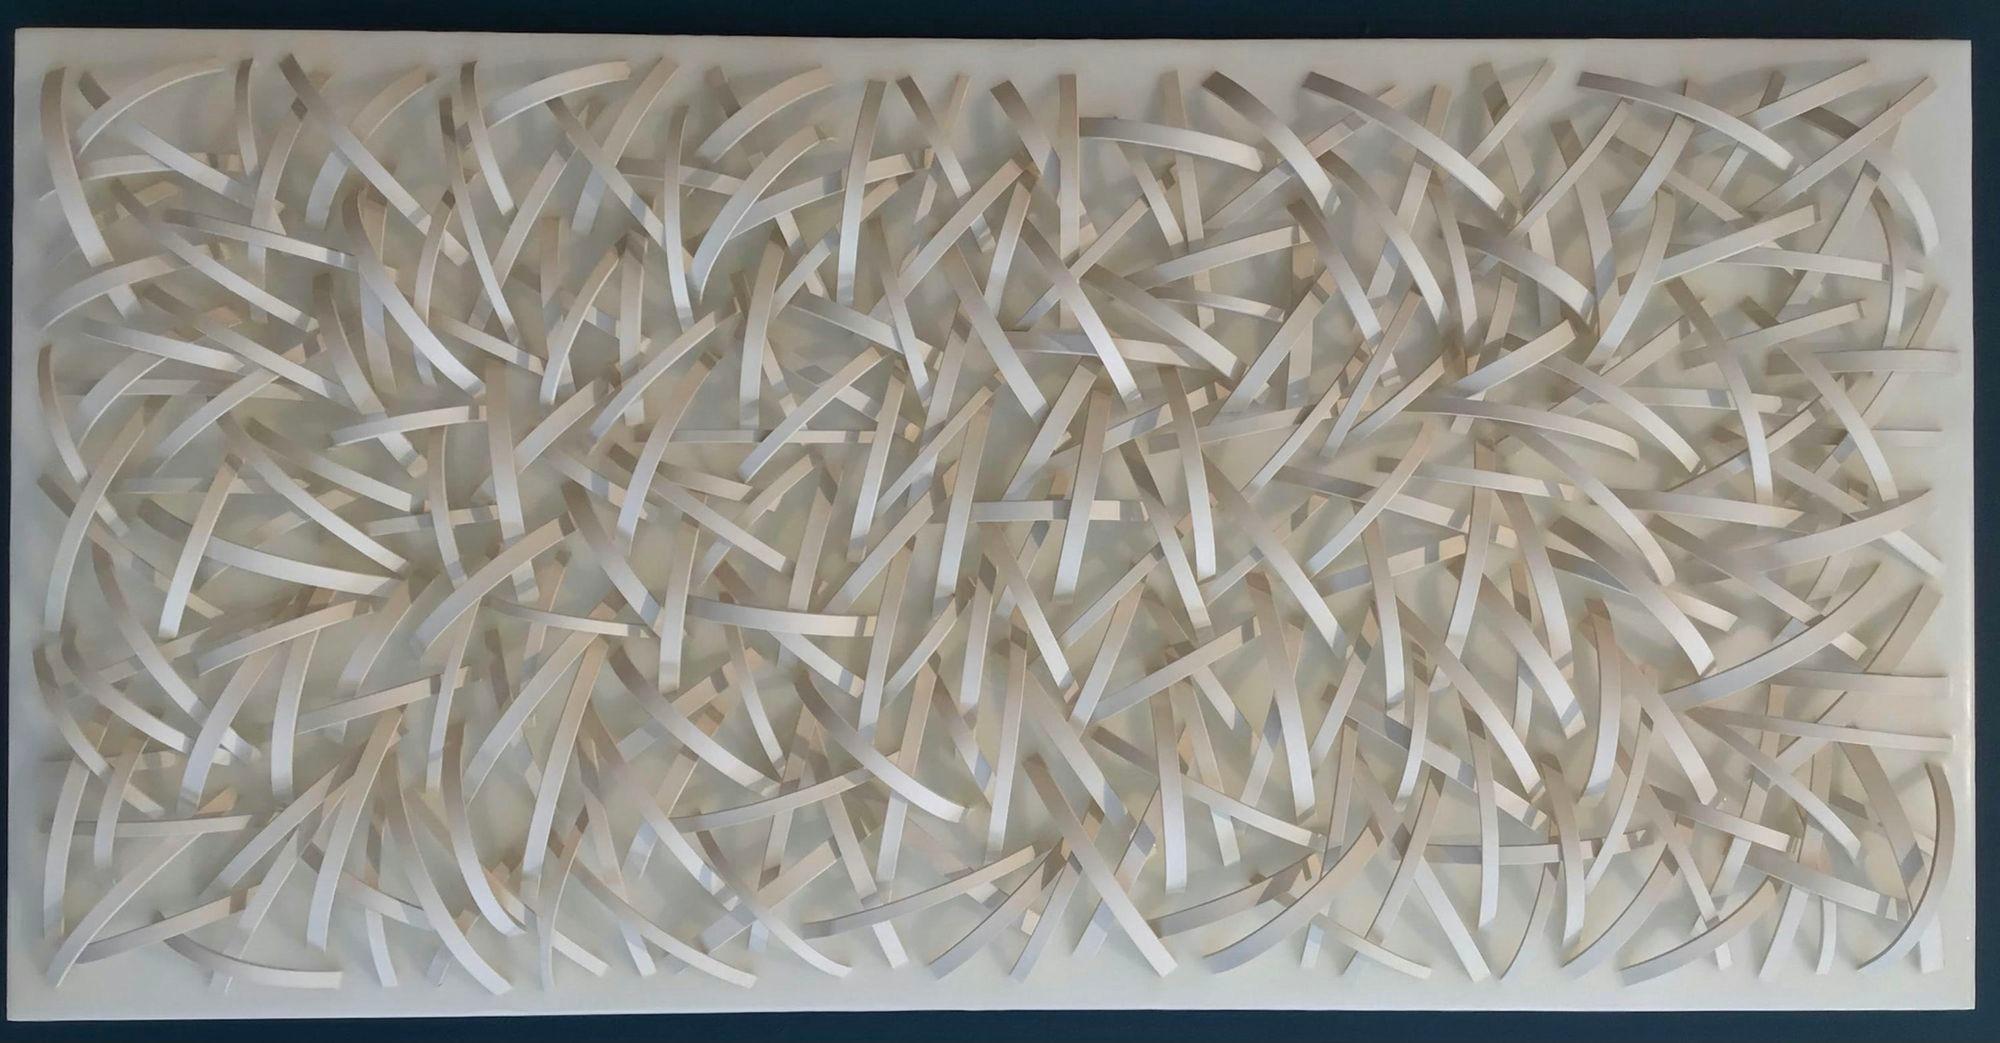 Contemporary Porcelain Wall Art by World Renowned Ceramic Artist, Paula Murray

Contemporary Porcelain wall art from the 'Peace Study' series by world renowned ceramic artist, Paula Murray; comprised of Porcelain arcs embedded in resin on aluminum.